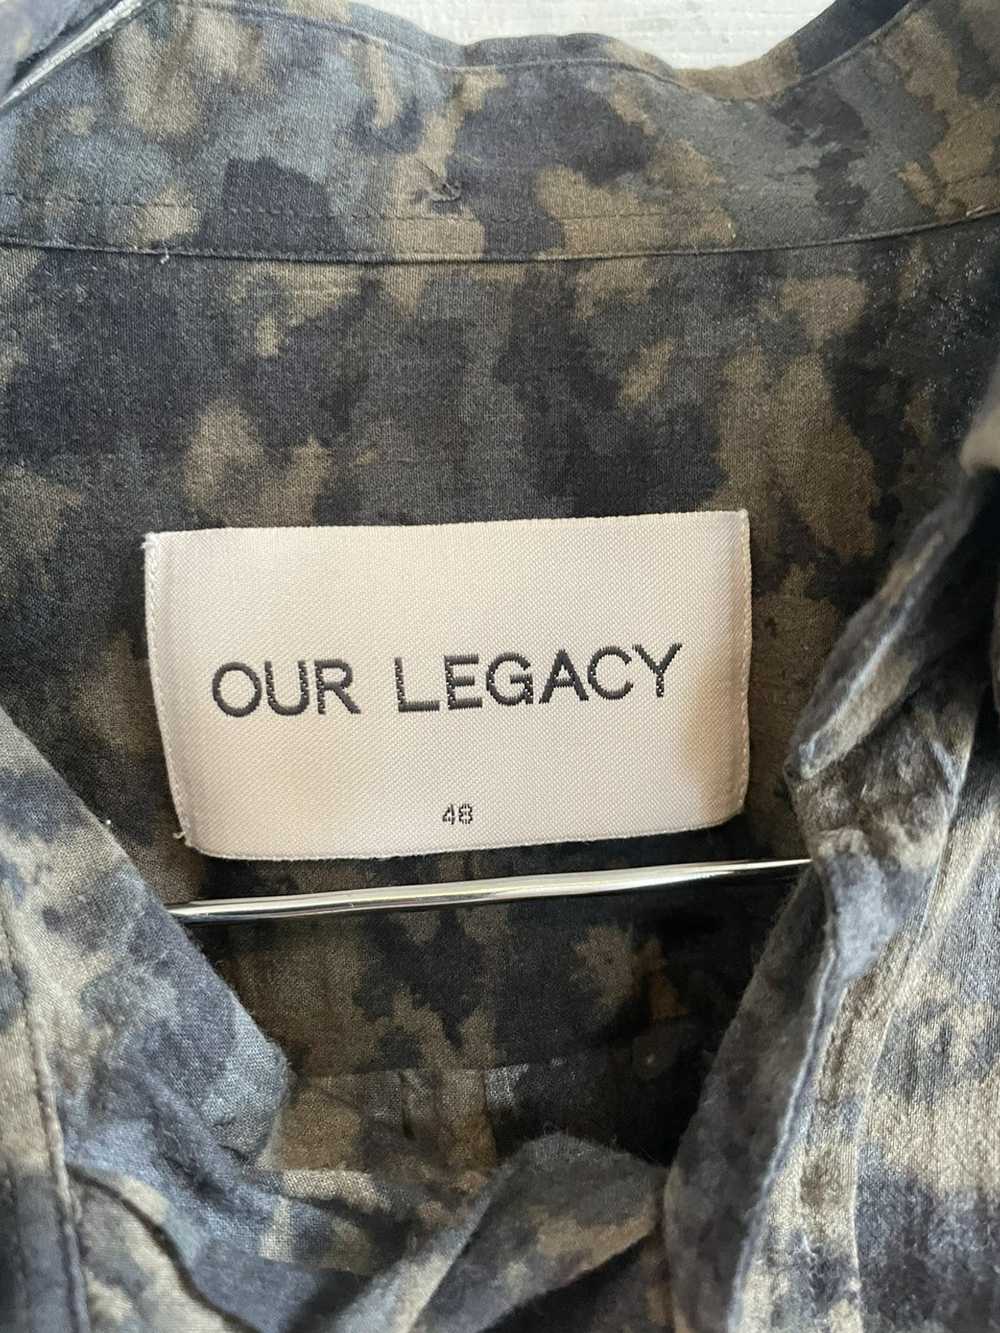 Our Legacy Our legacy SS15 Moss camo - image 3